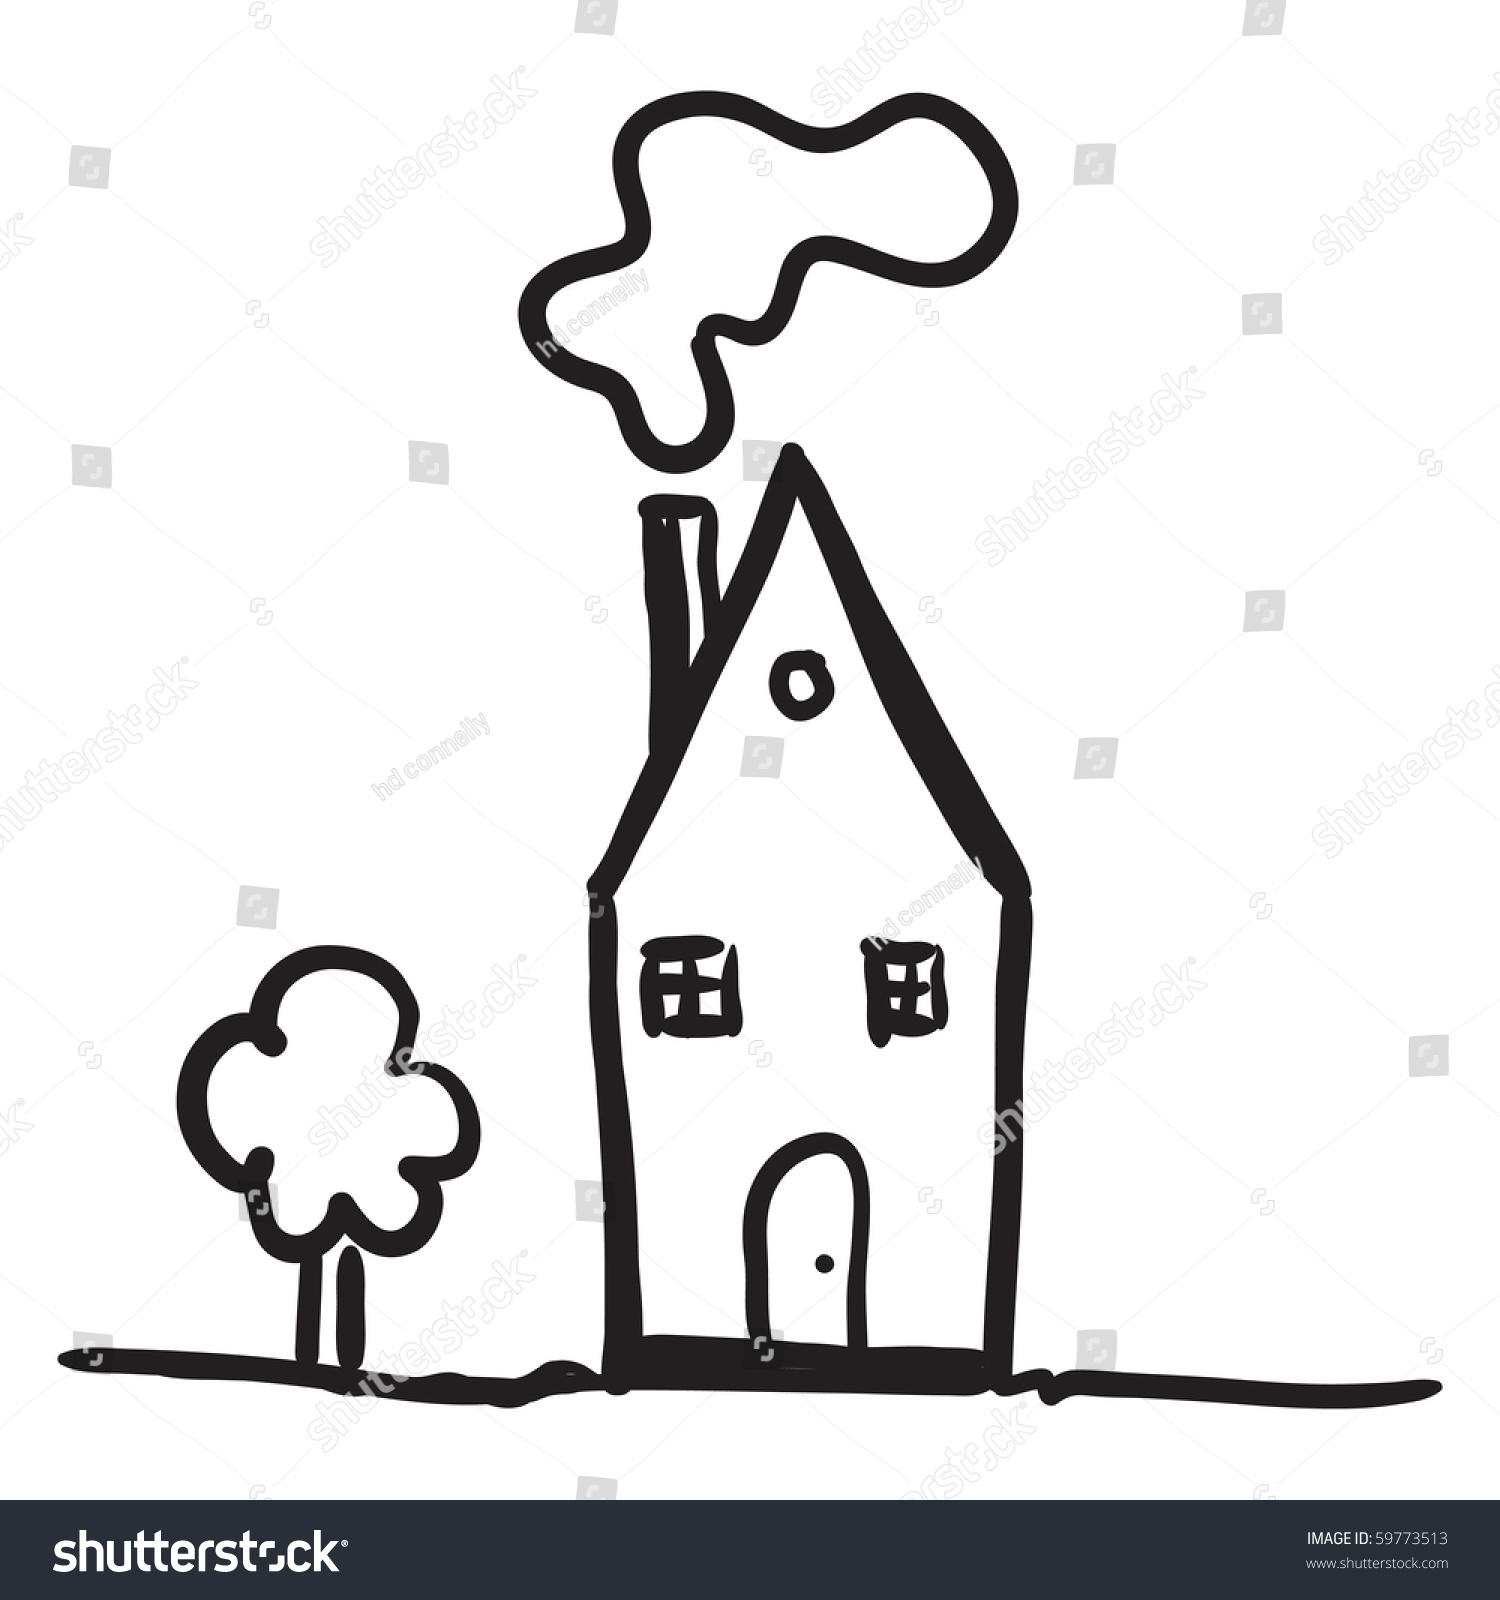 Simple Drawing Of A House Stock Vector Illustration 59773513 : Shutterstock